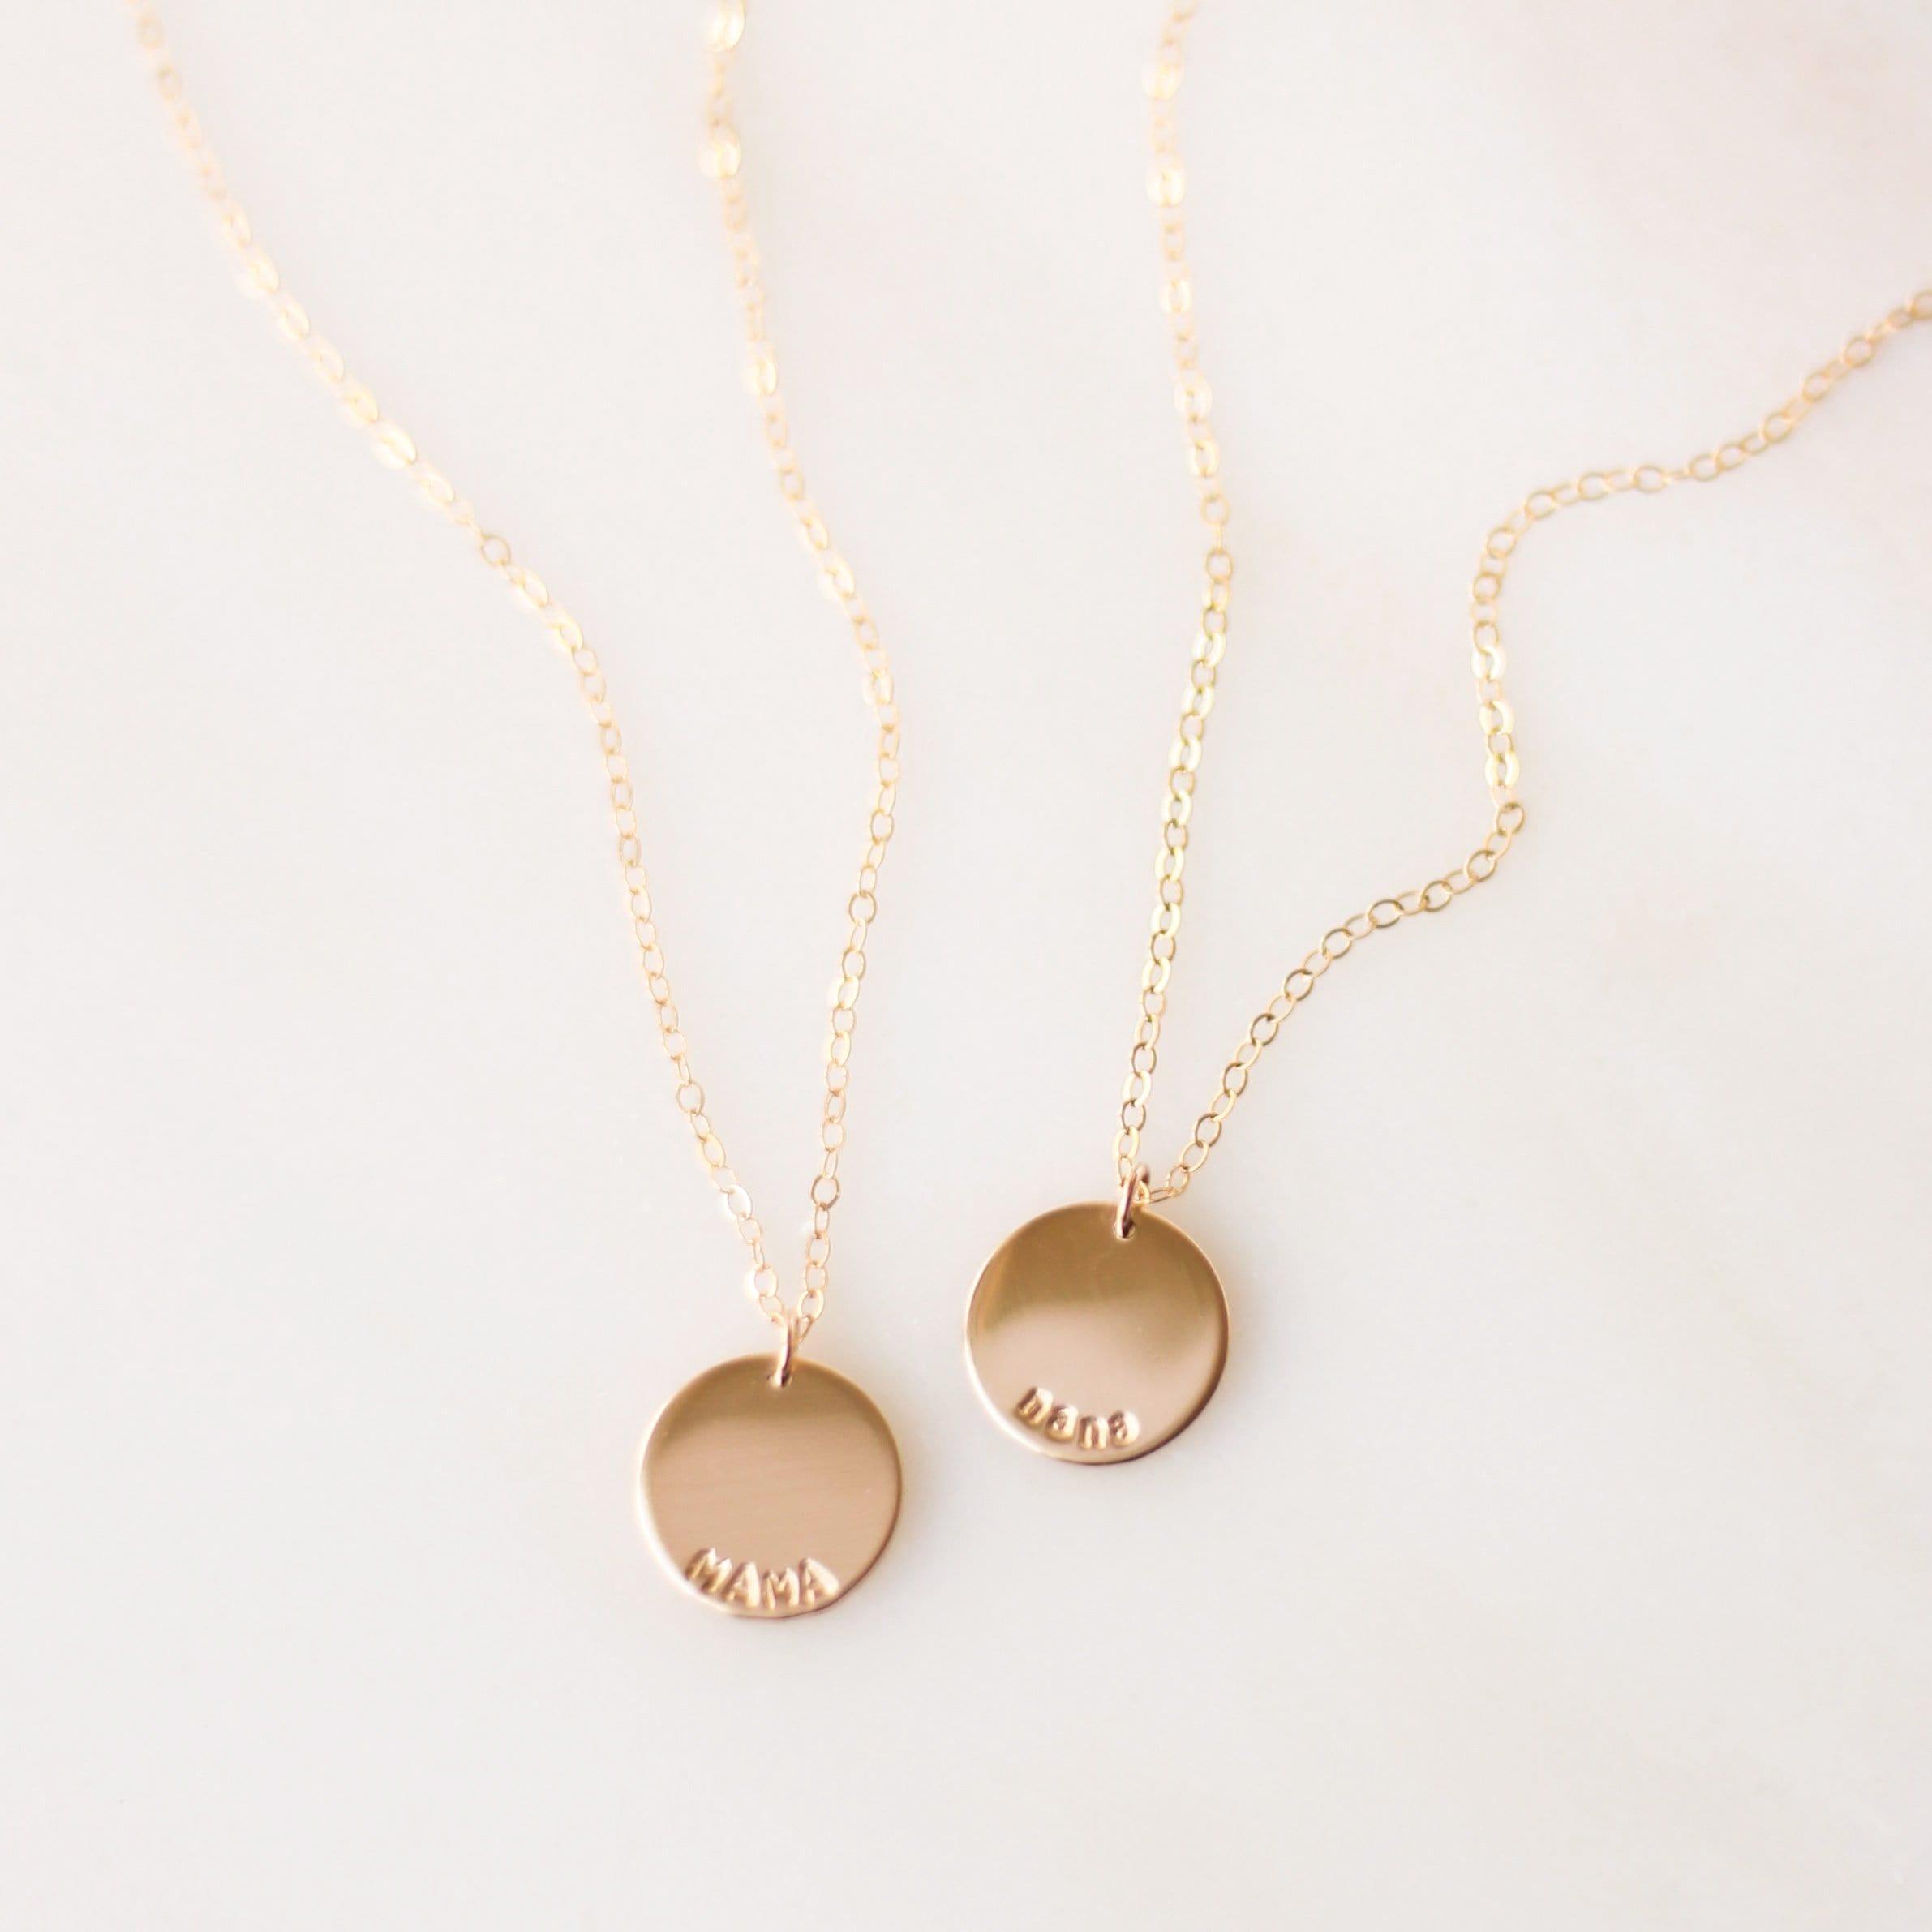 Mama Disc Necklace - Nolia Jewelry - Meaningful + Sustainably Handcrafted Jewelry